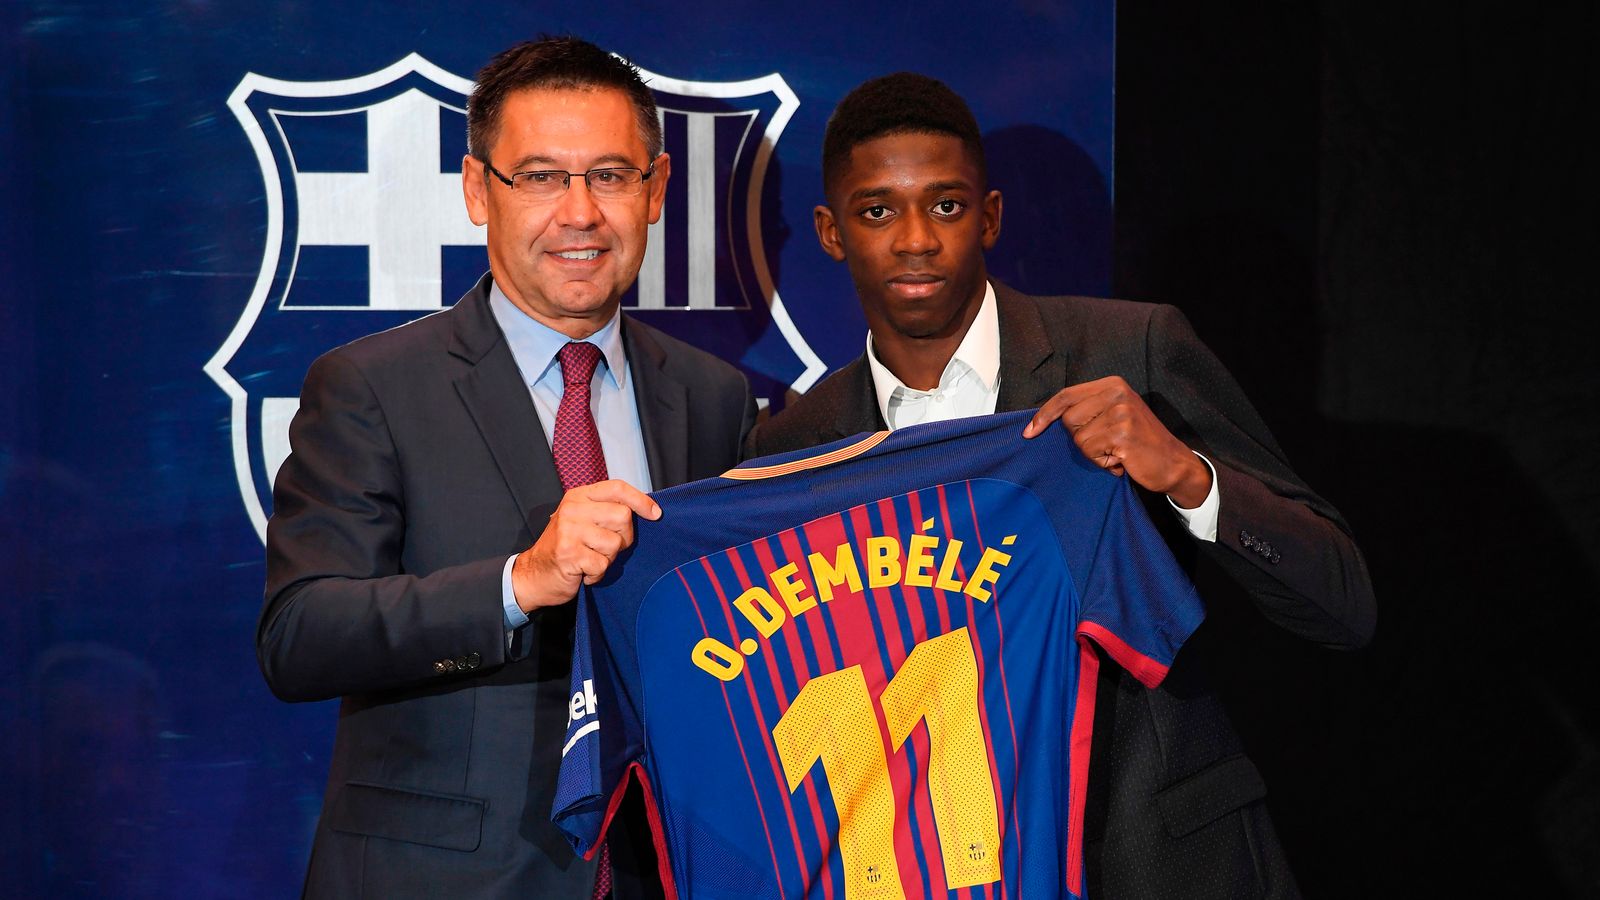 Ousmane Dembele officially a Barcelona player after signing five-year deal  | Football News | Sky Sports